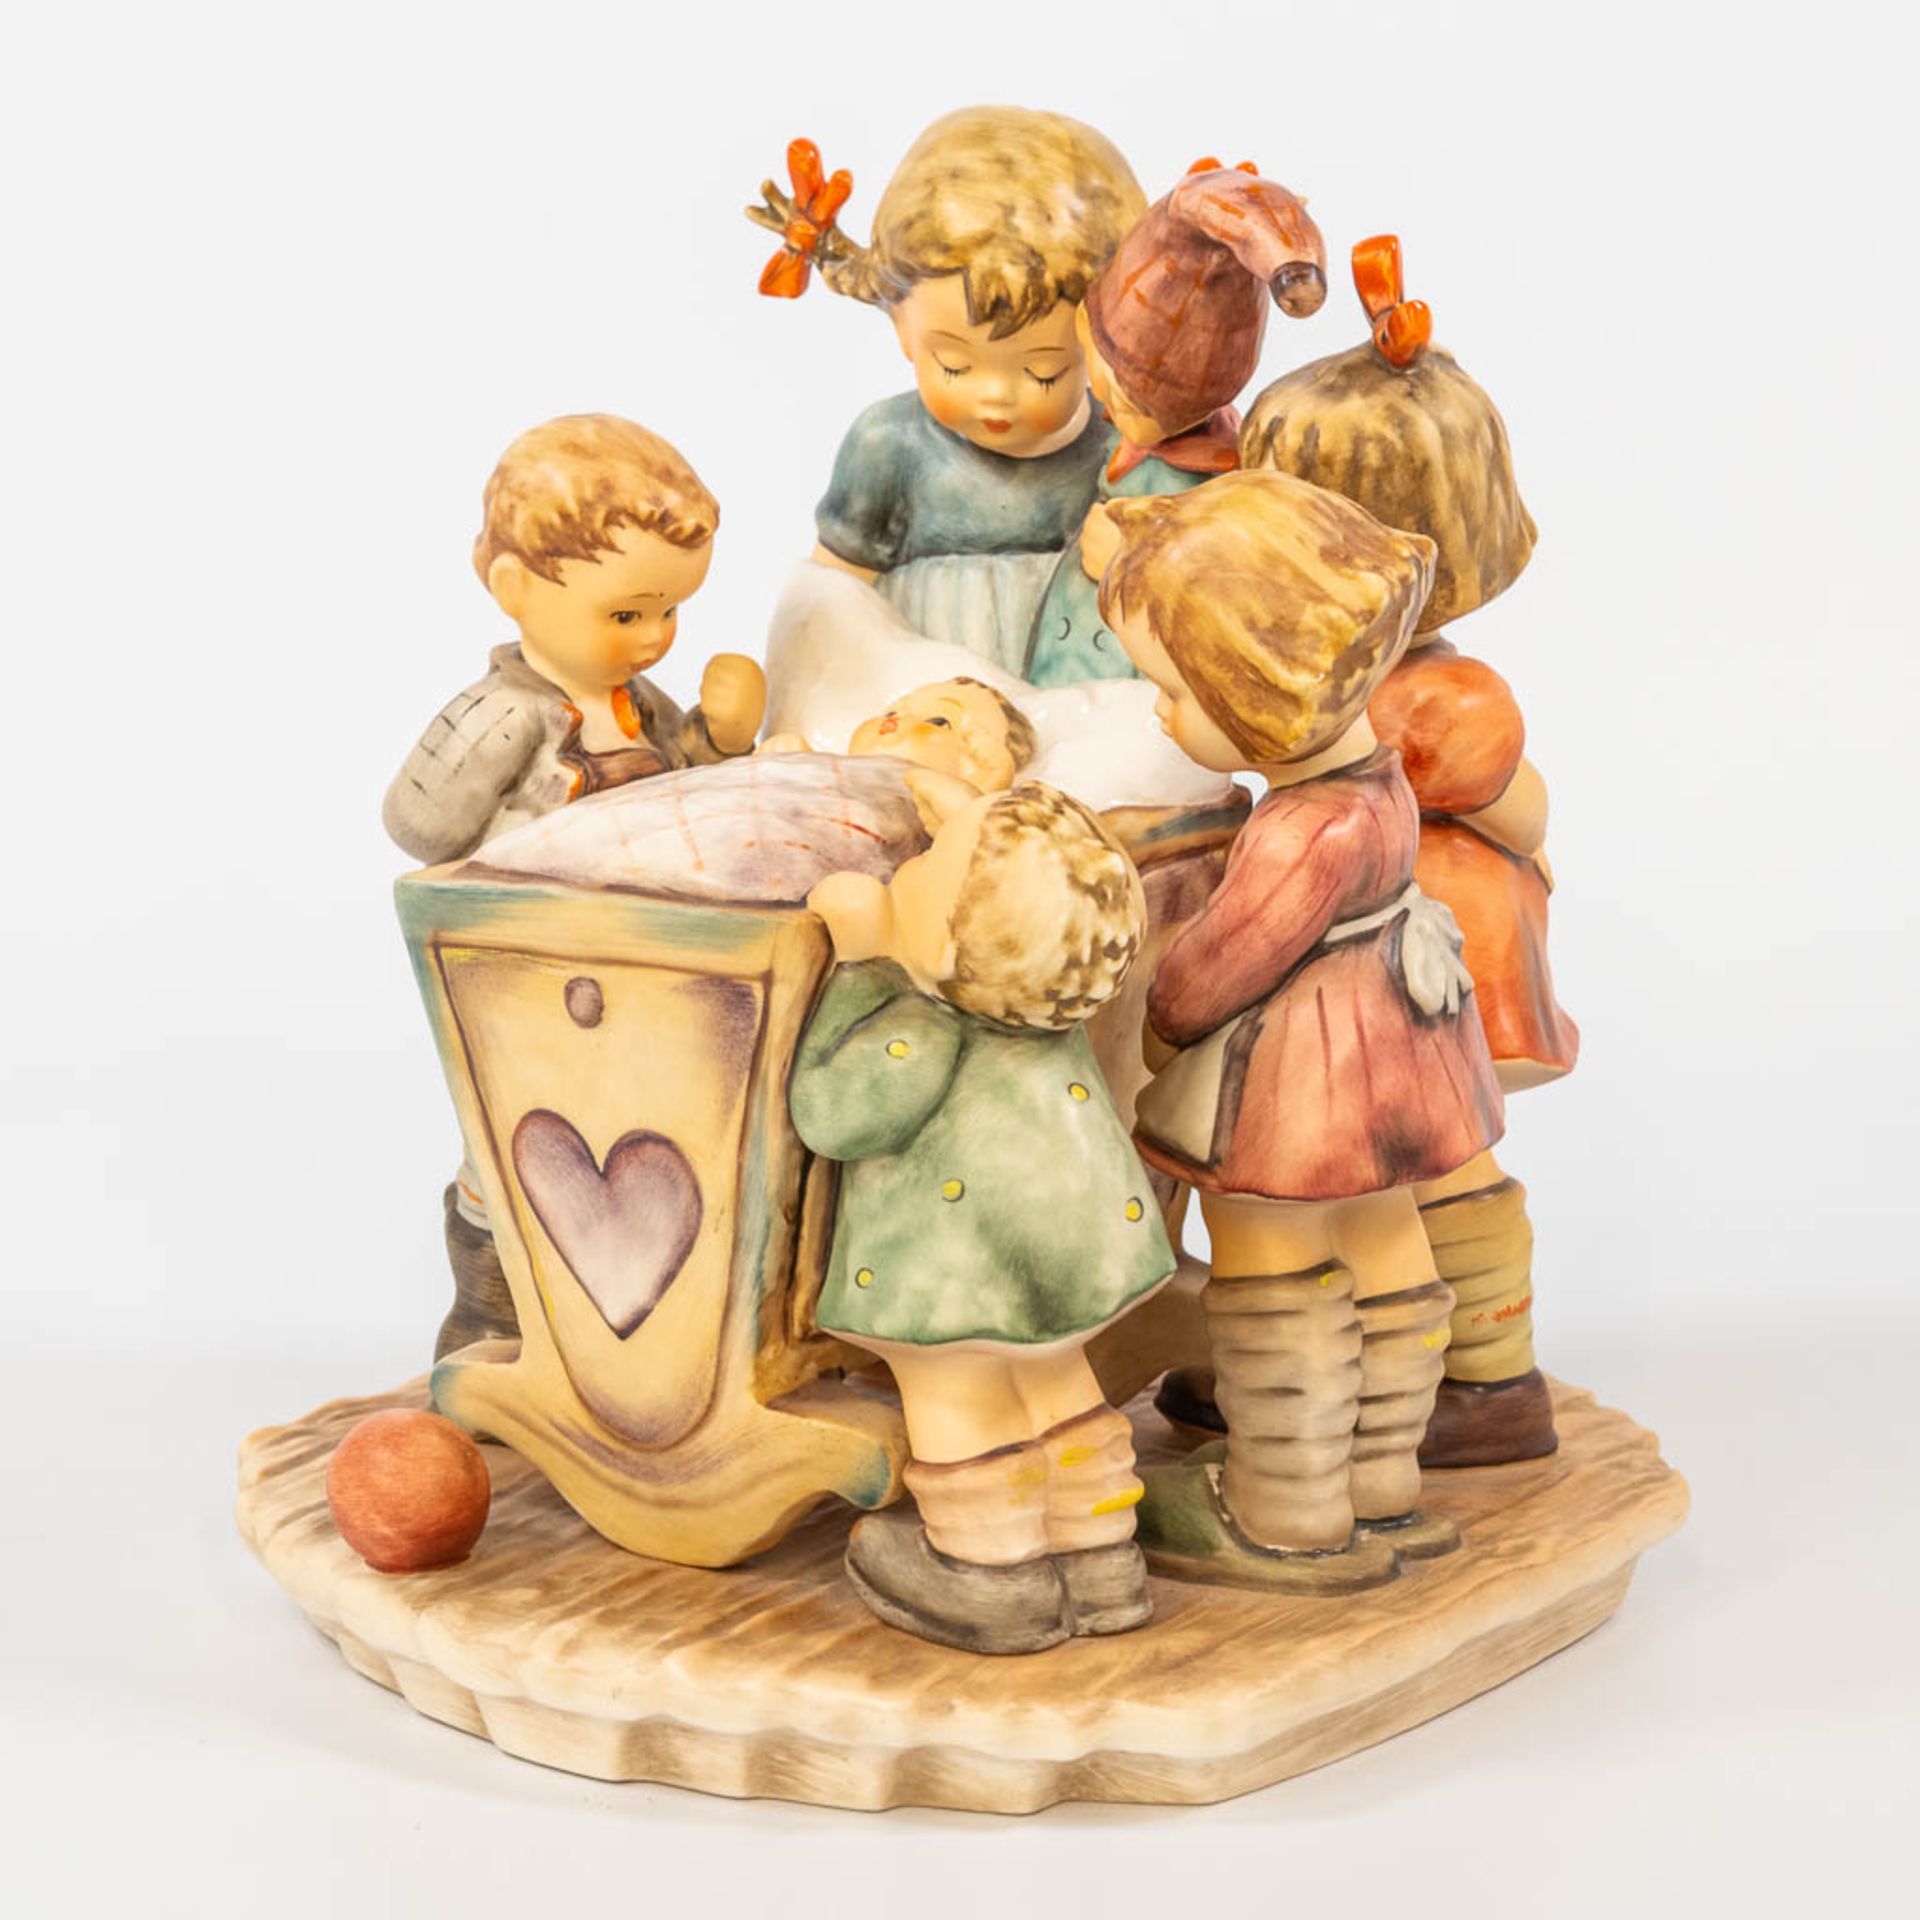 A Hummel porcelain statue The century collection 1994 number 574. (19 x 16,5 x 19 cm) - Image 9 of 11